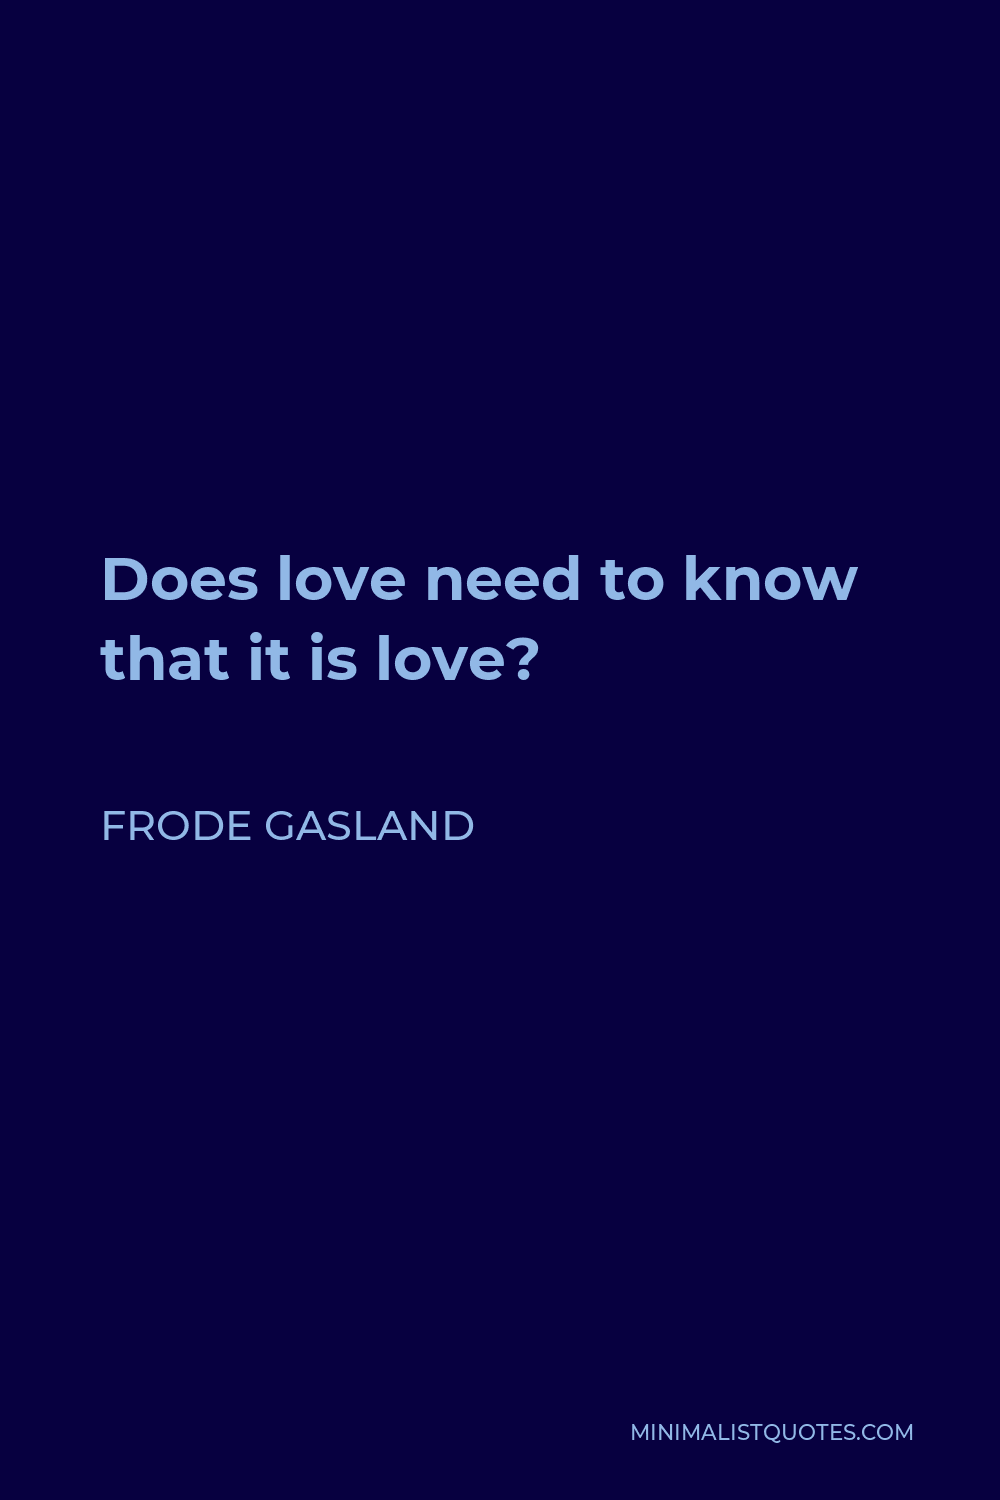 Frode Gasland Quote - Does love need to know that it is love?